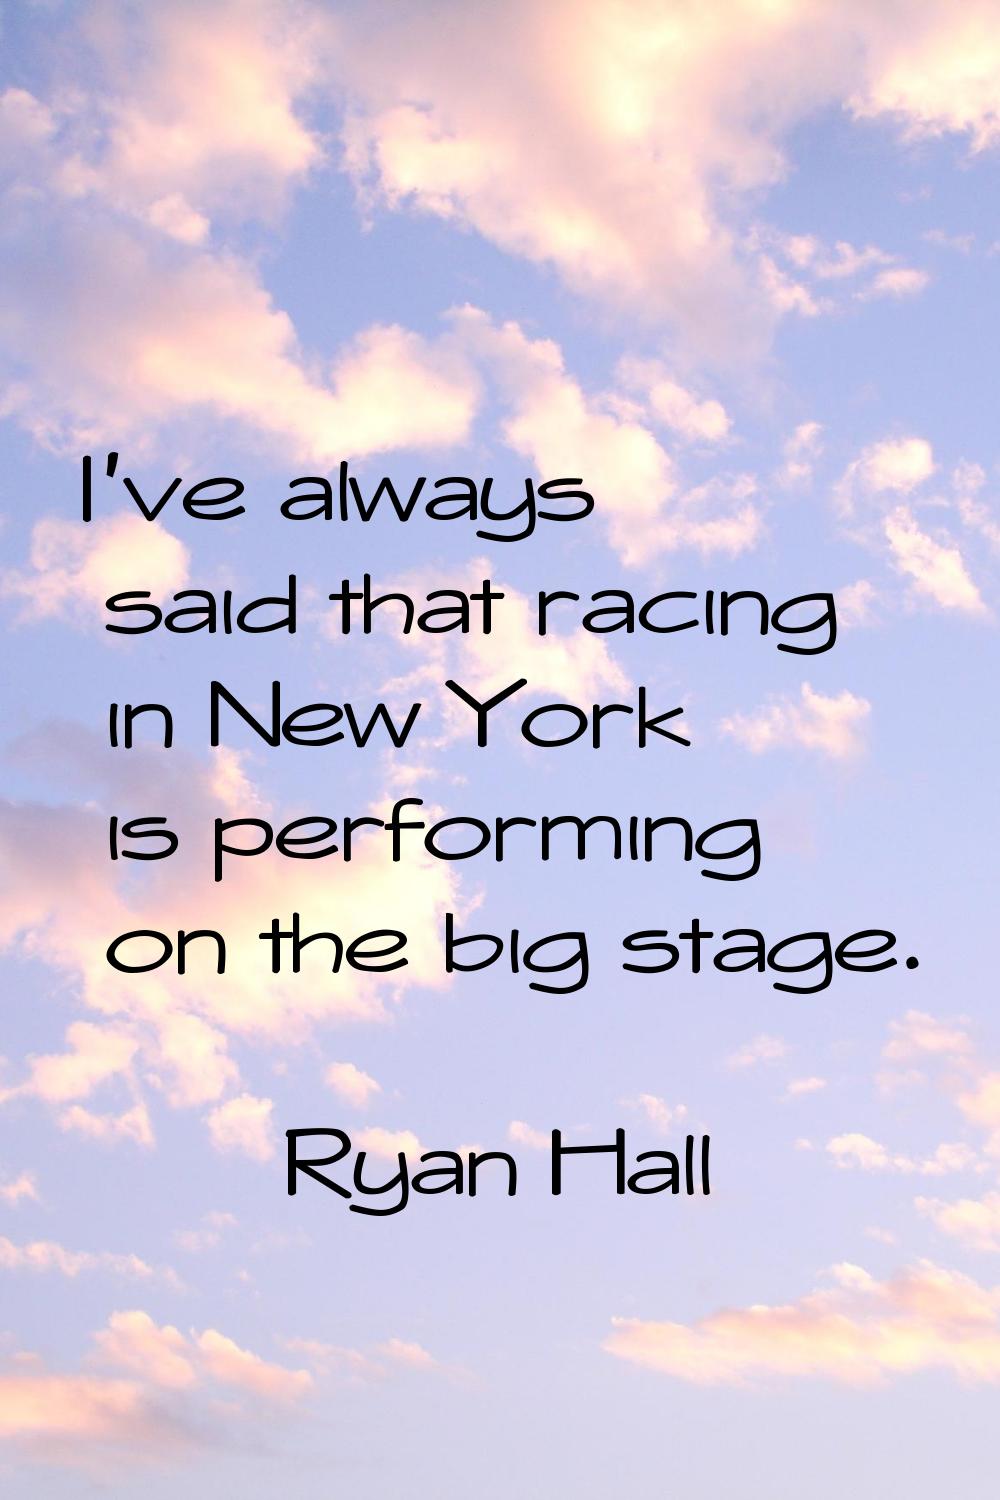 I've always said that racing in New York is performing on the big stage.